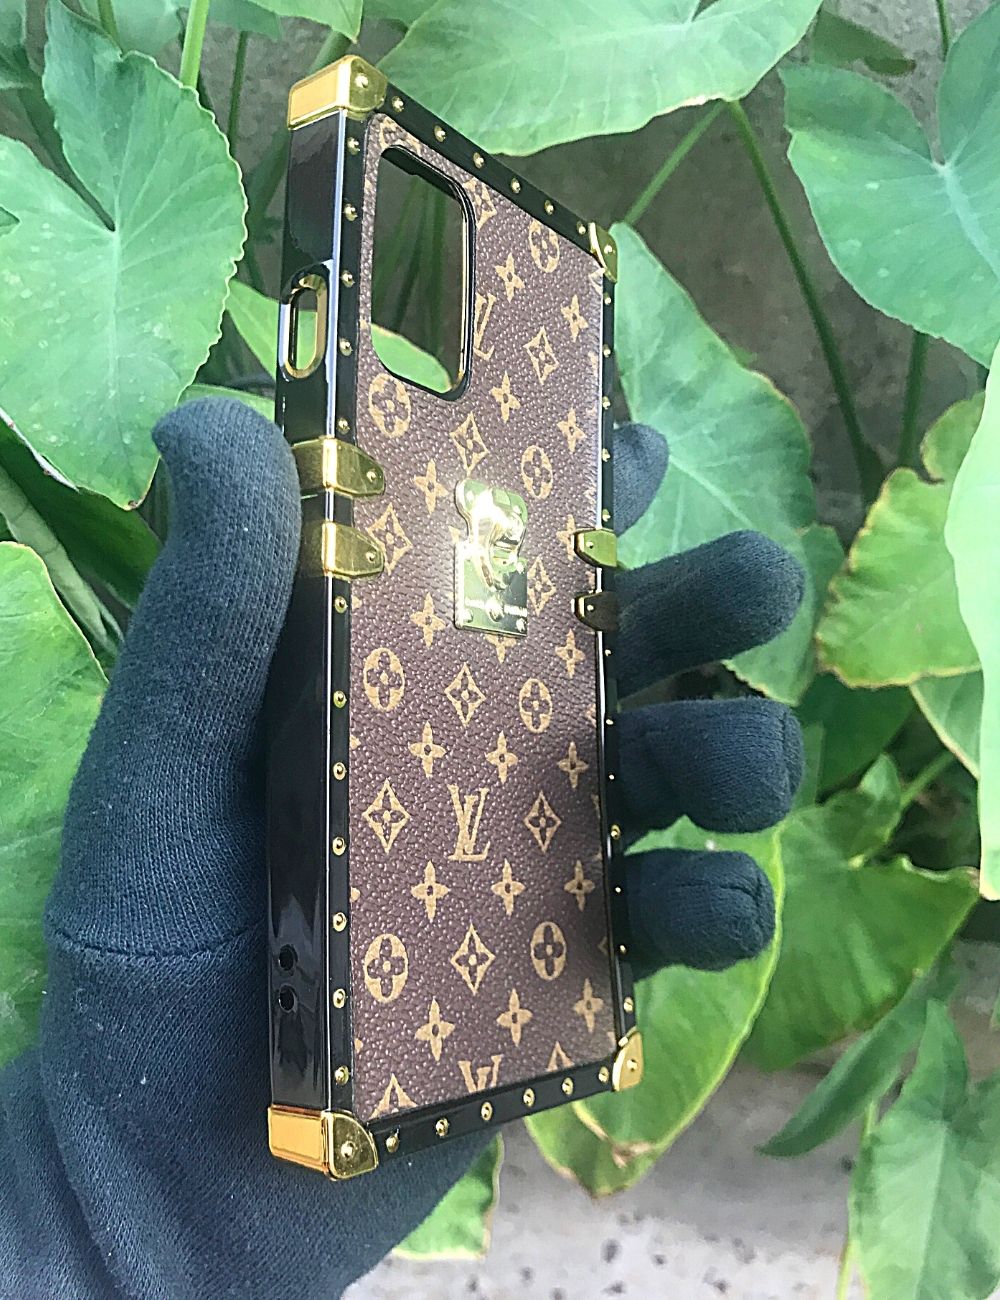 LV cases for iPhone and Samsung phones  Louis vuitton, Louis vuitton  handbags, Vuitton